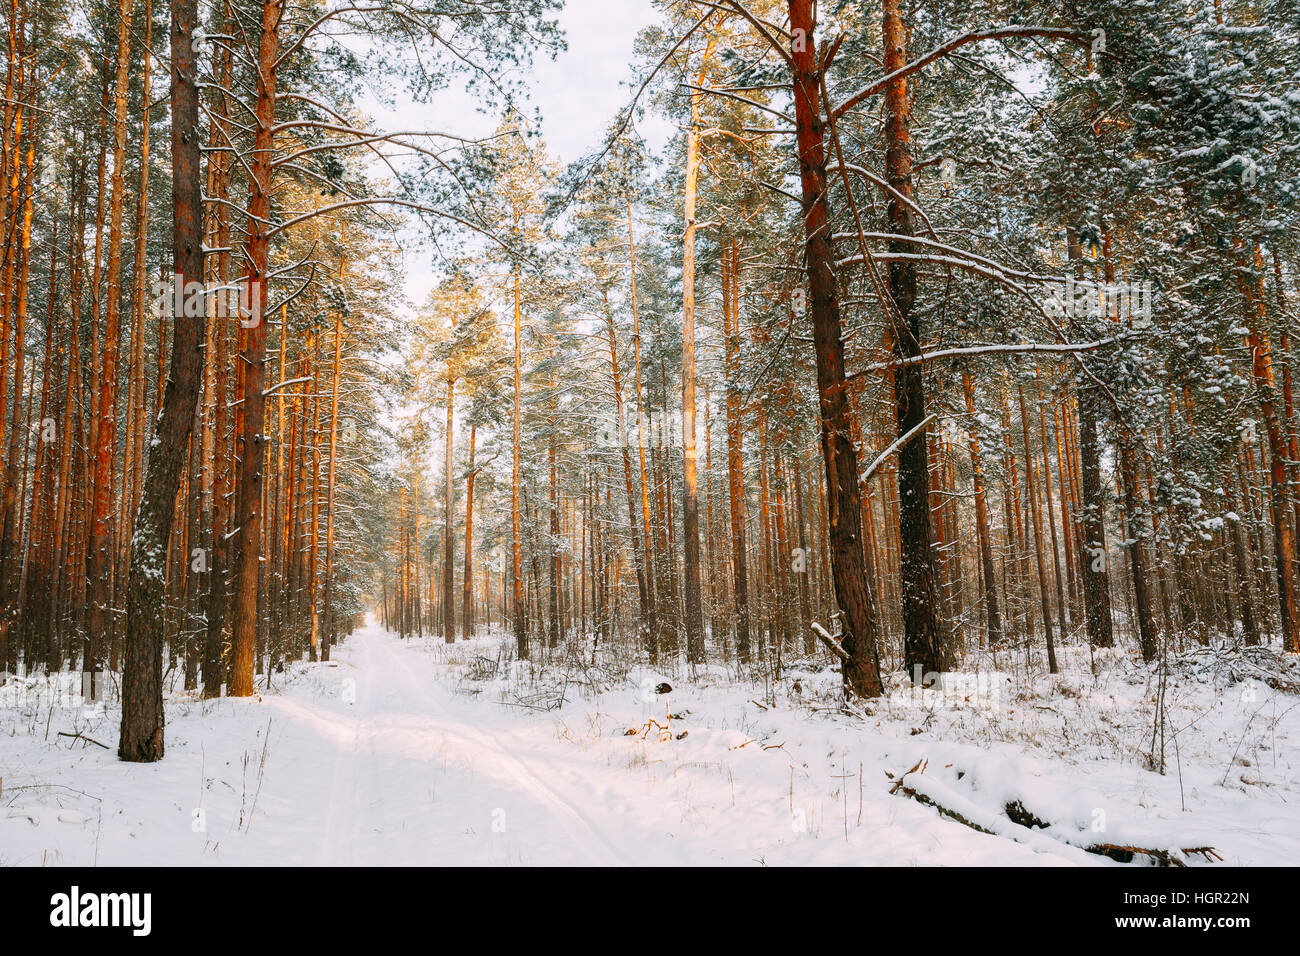 Winter Snowy Coniferous Forest. Snowy Path, Road, Way Or Pathway In Winter Forest Stock Photo